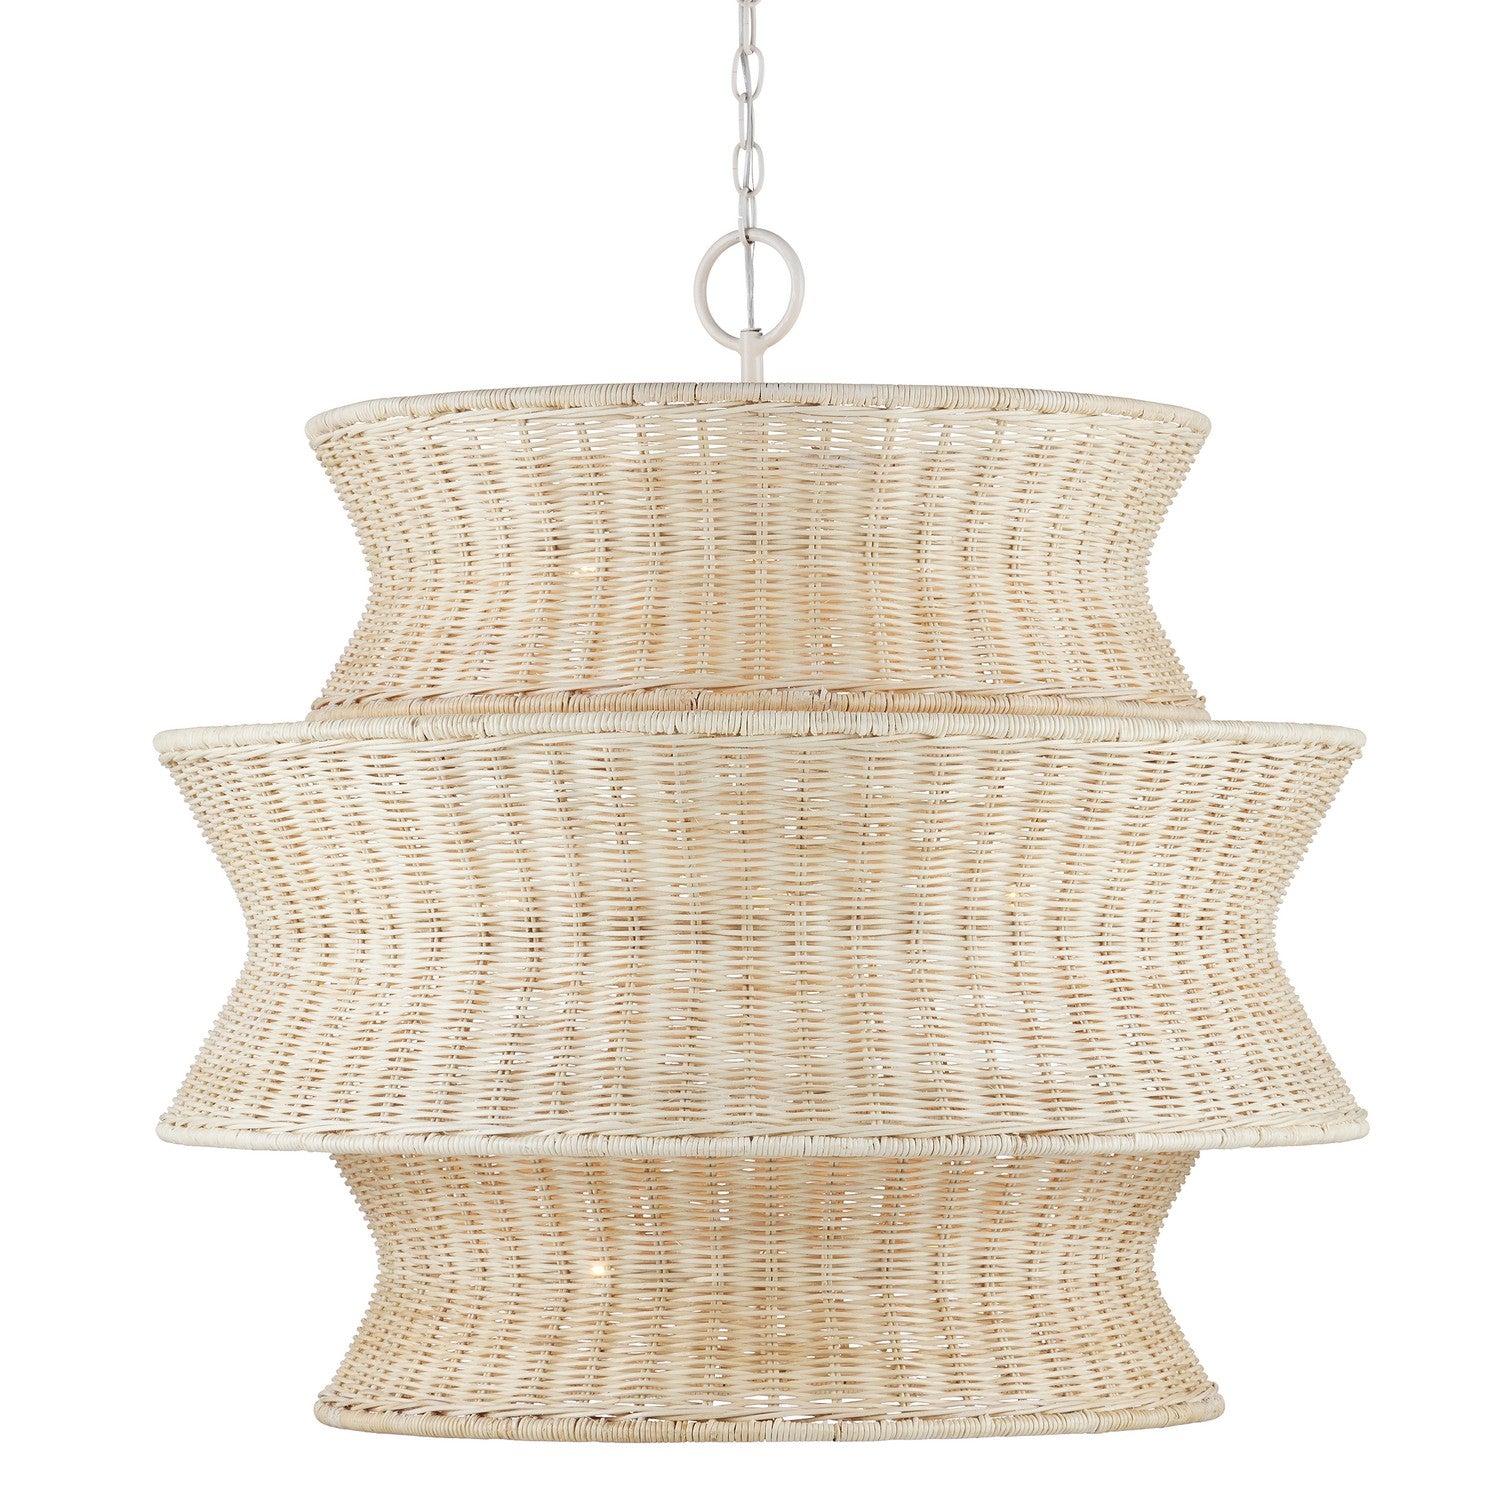 Currey and Company - 9000-1084 - Nine Light Chandelier - Bleached Natural/Vanilla